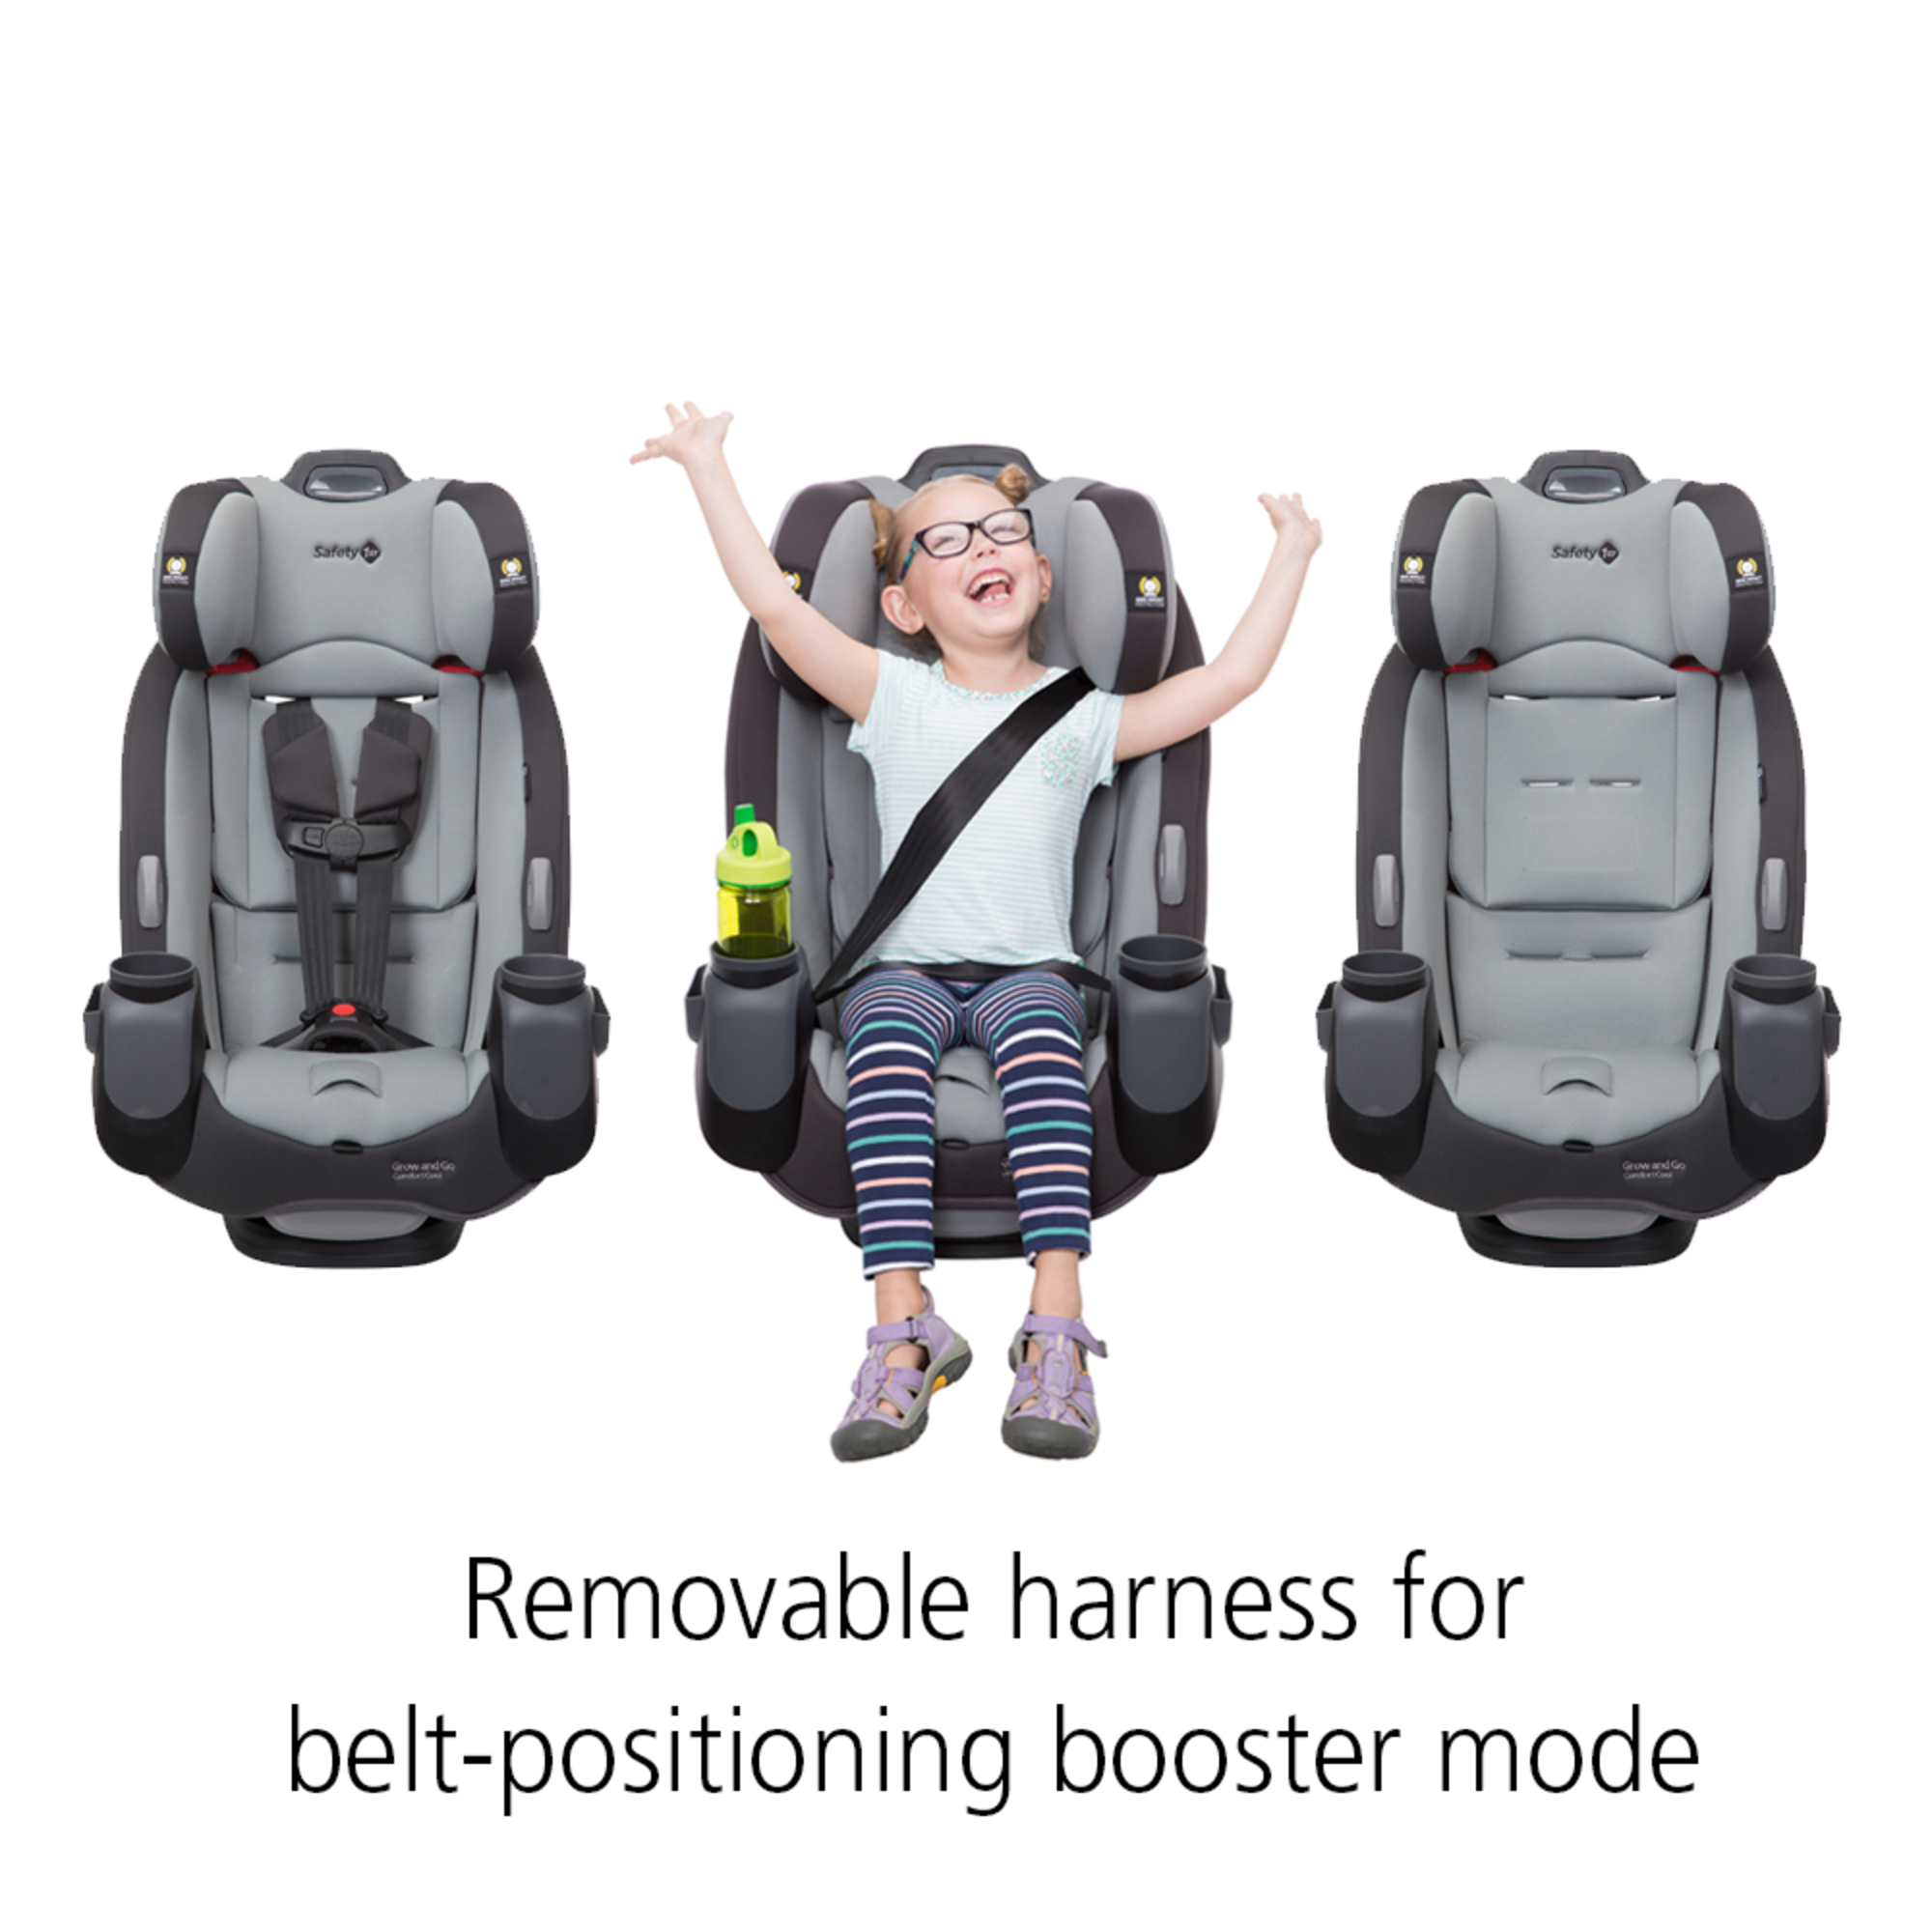 Removable harness for belr-positioning booster mode